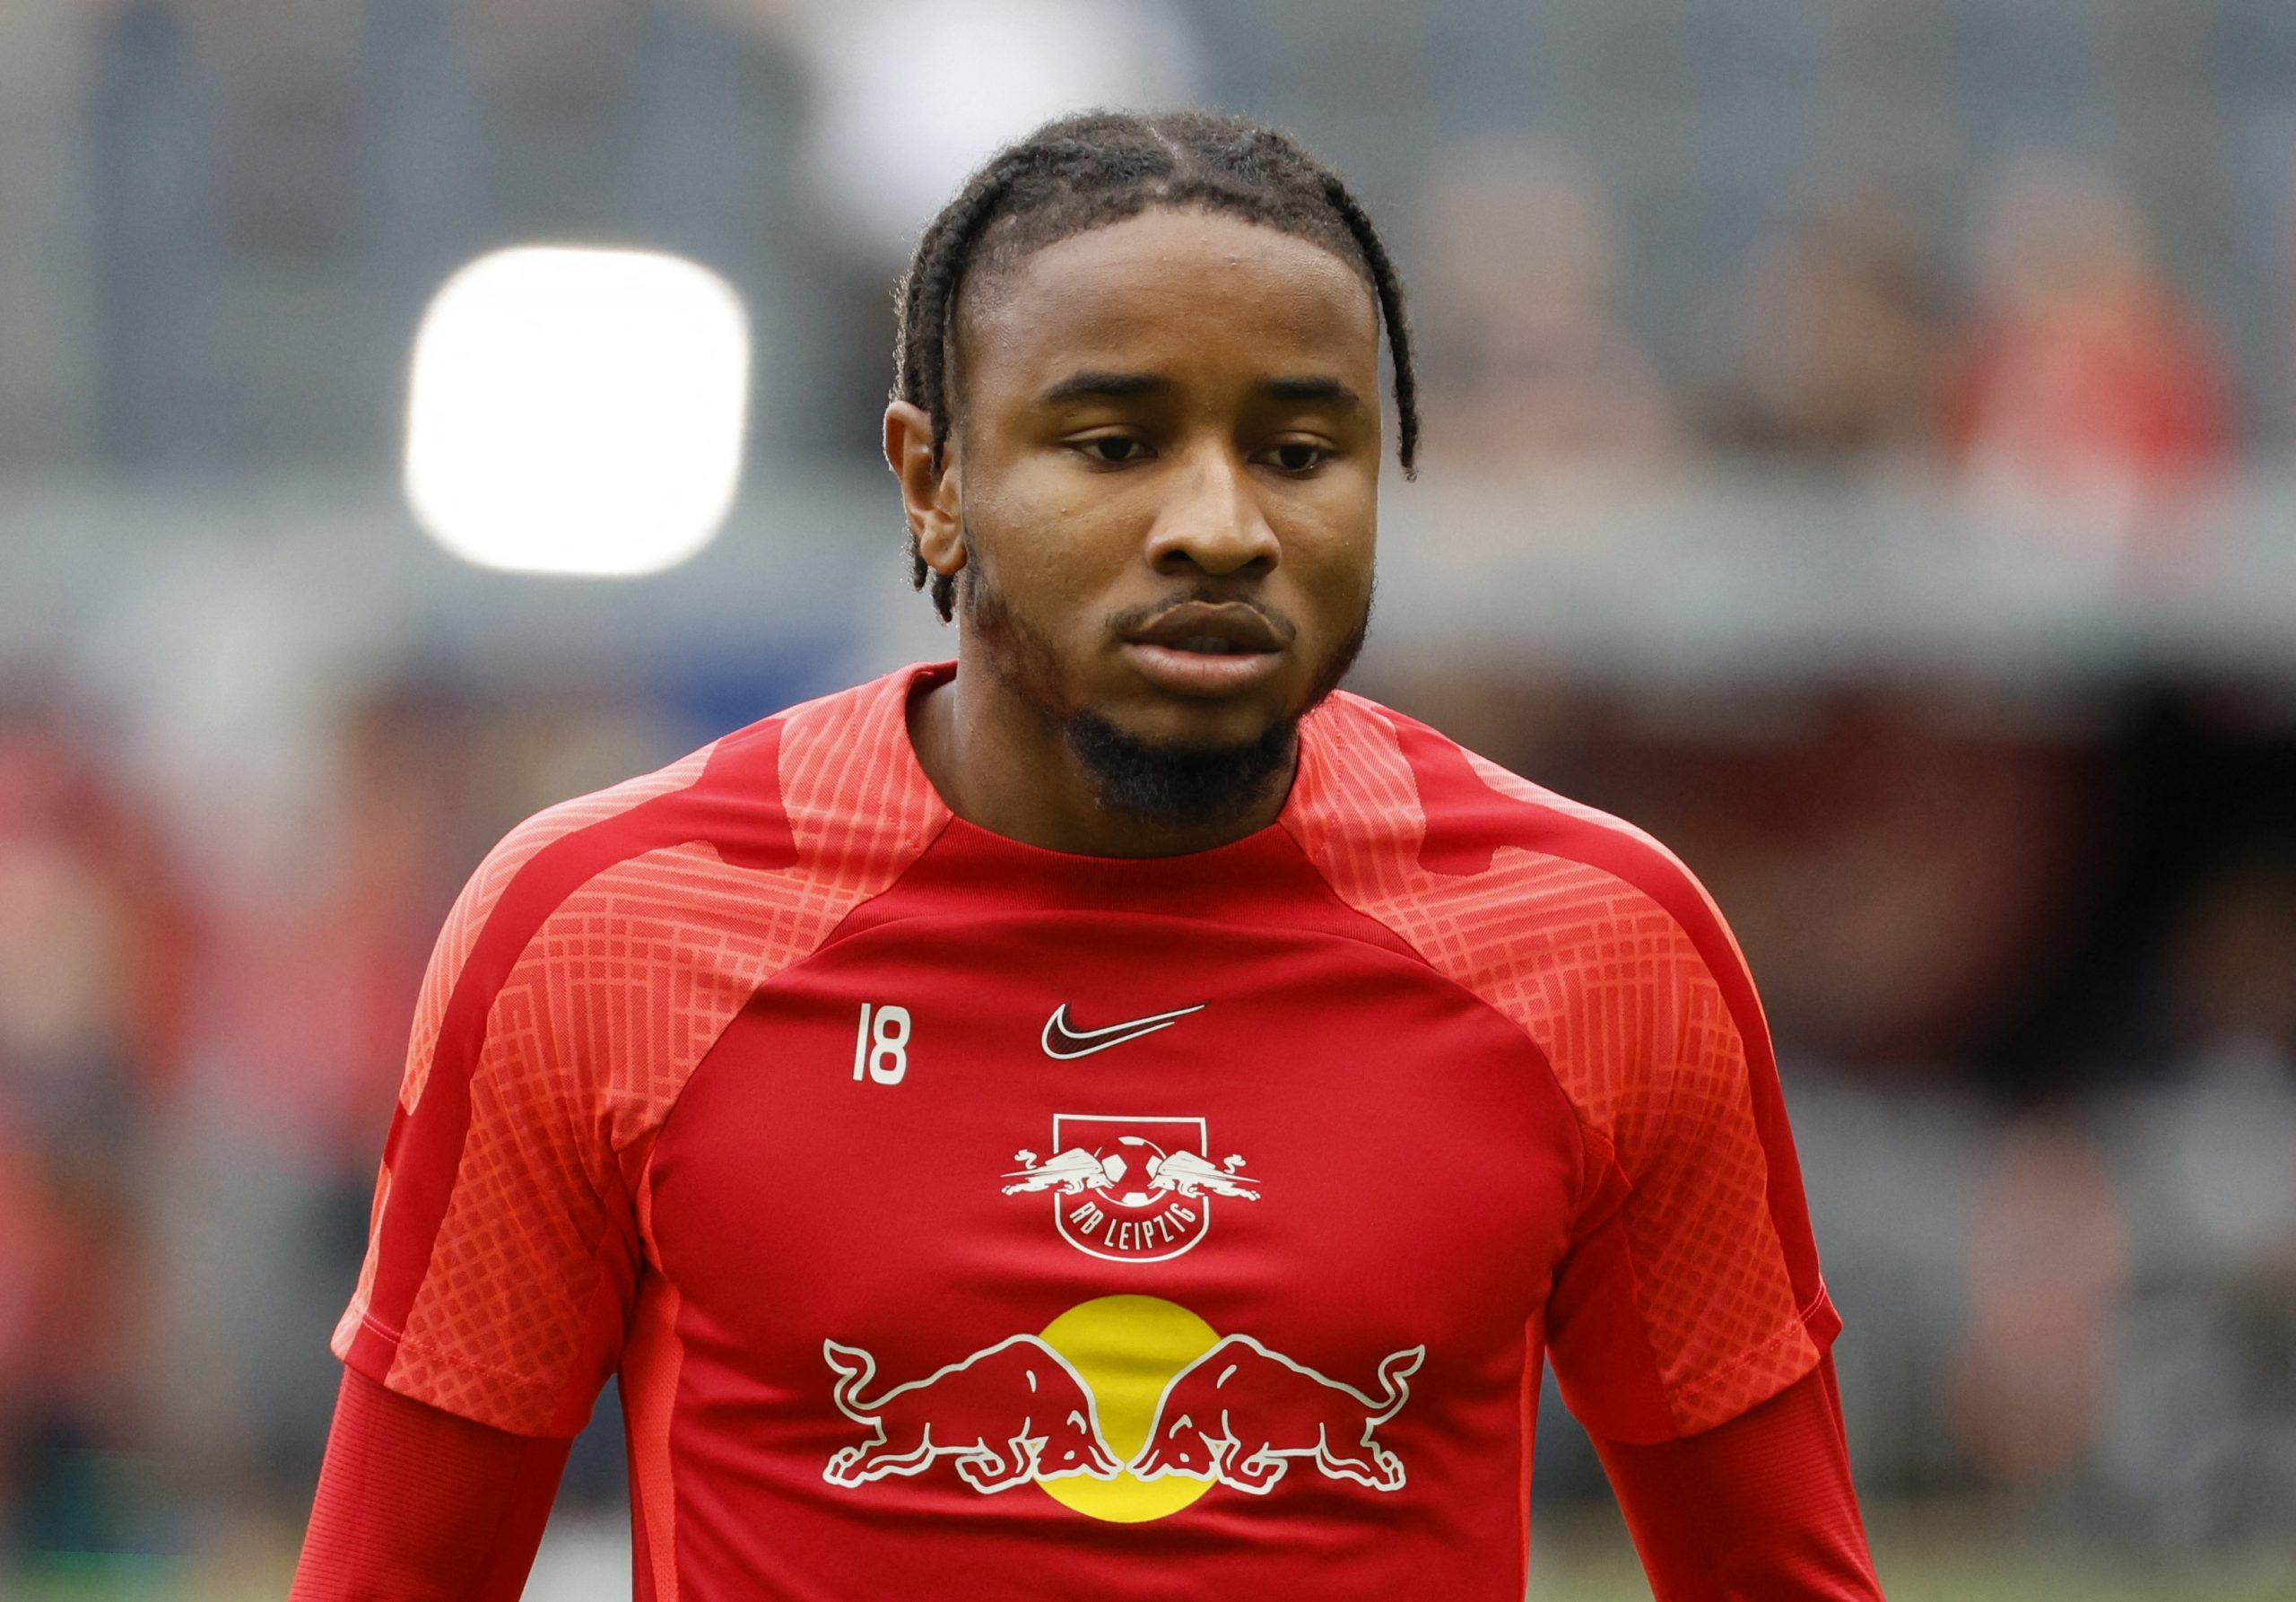 RB Leipzig's Christopher Nkunku during the warm up before the match